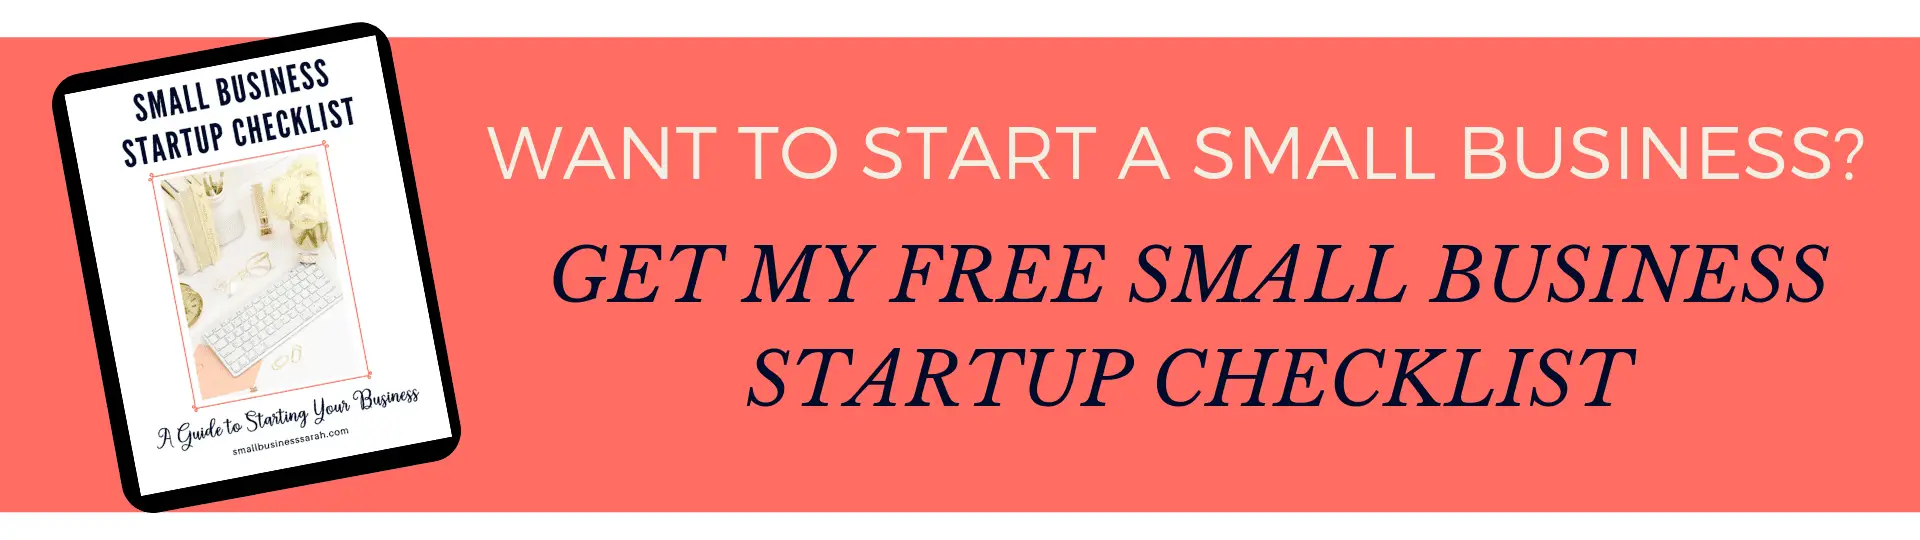 Get your FREE Small Business Startup Checklist